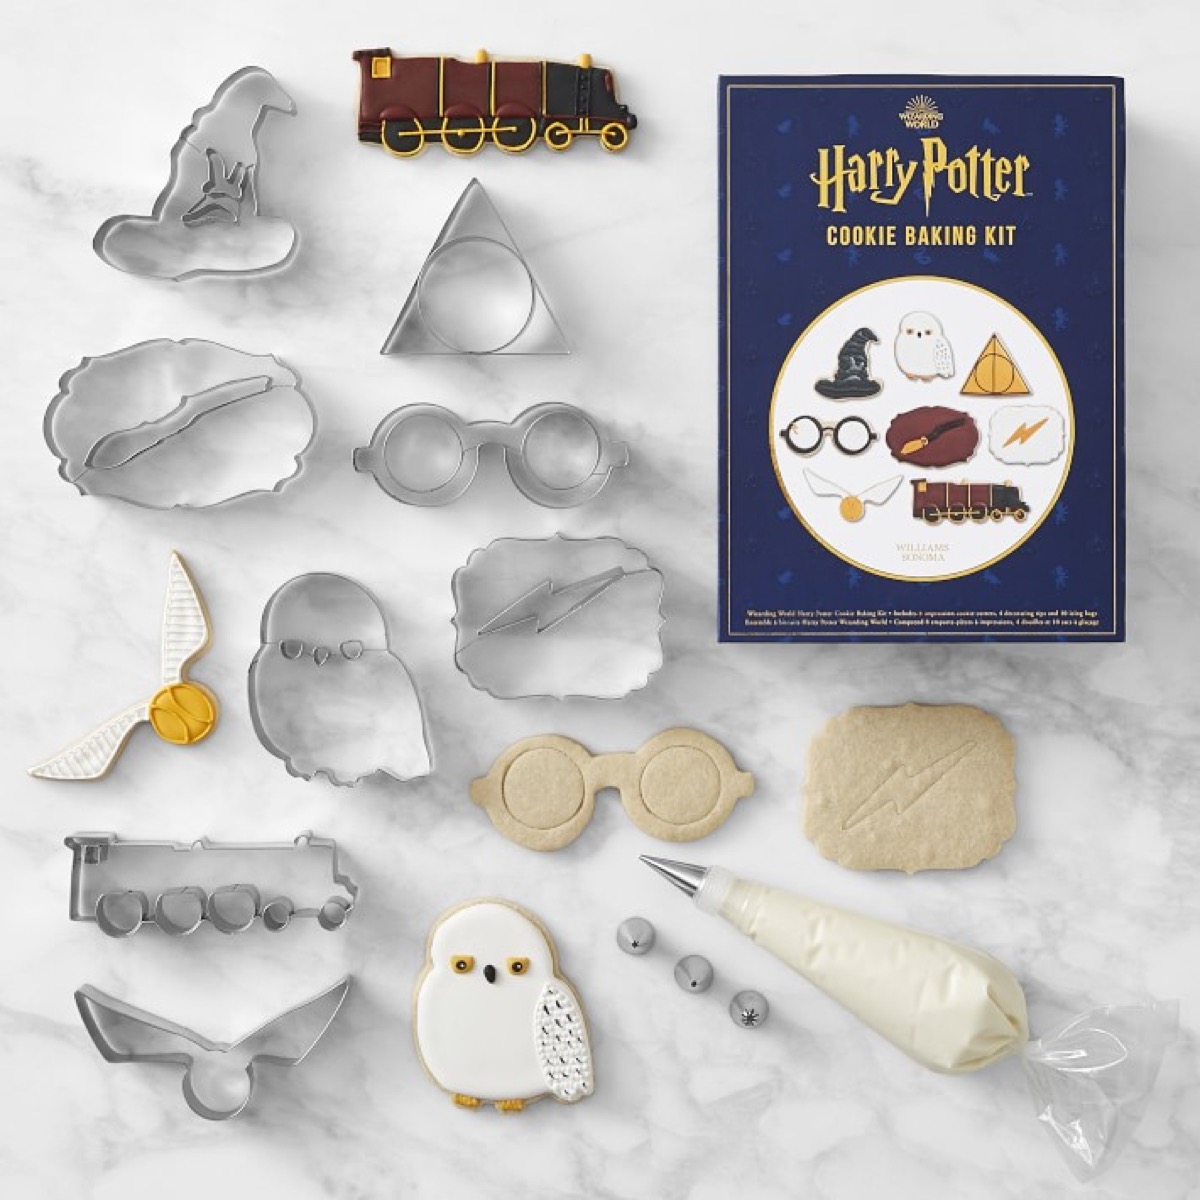 Epic Stuff - Harry Potter Gift Hamper For Potterheads - Officially Licensed  By Warner Bros, USA : Amazon.in: Office Products